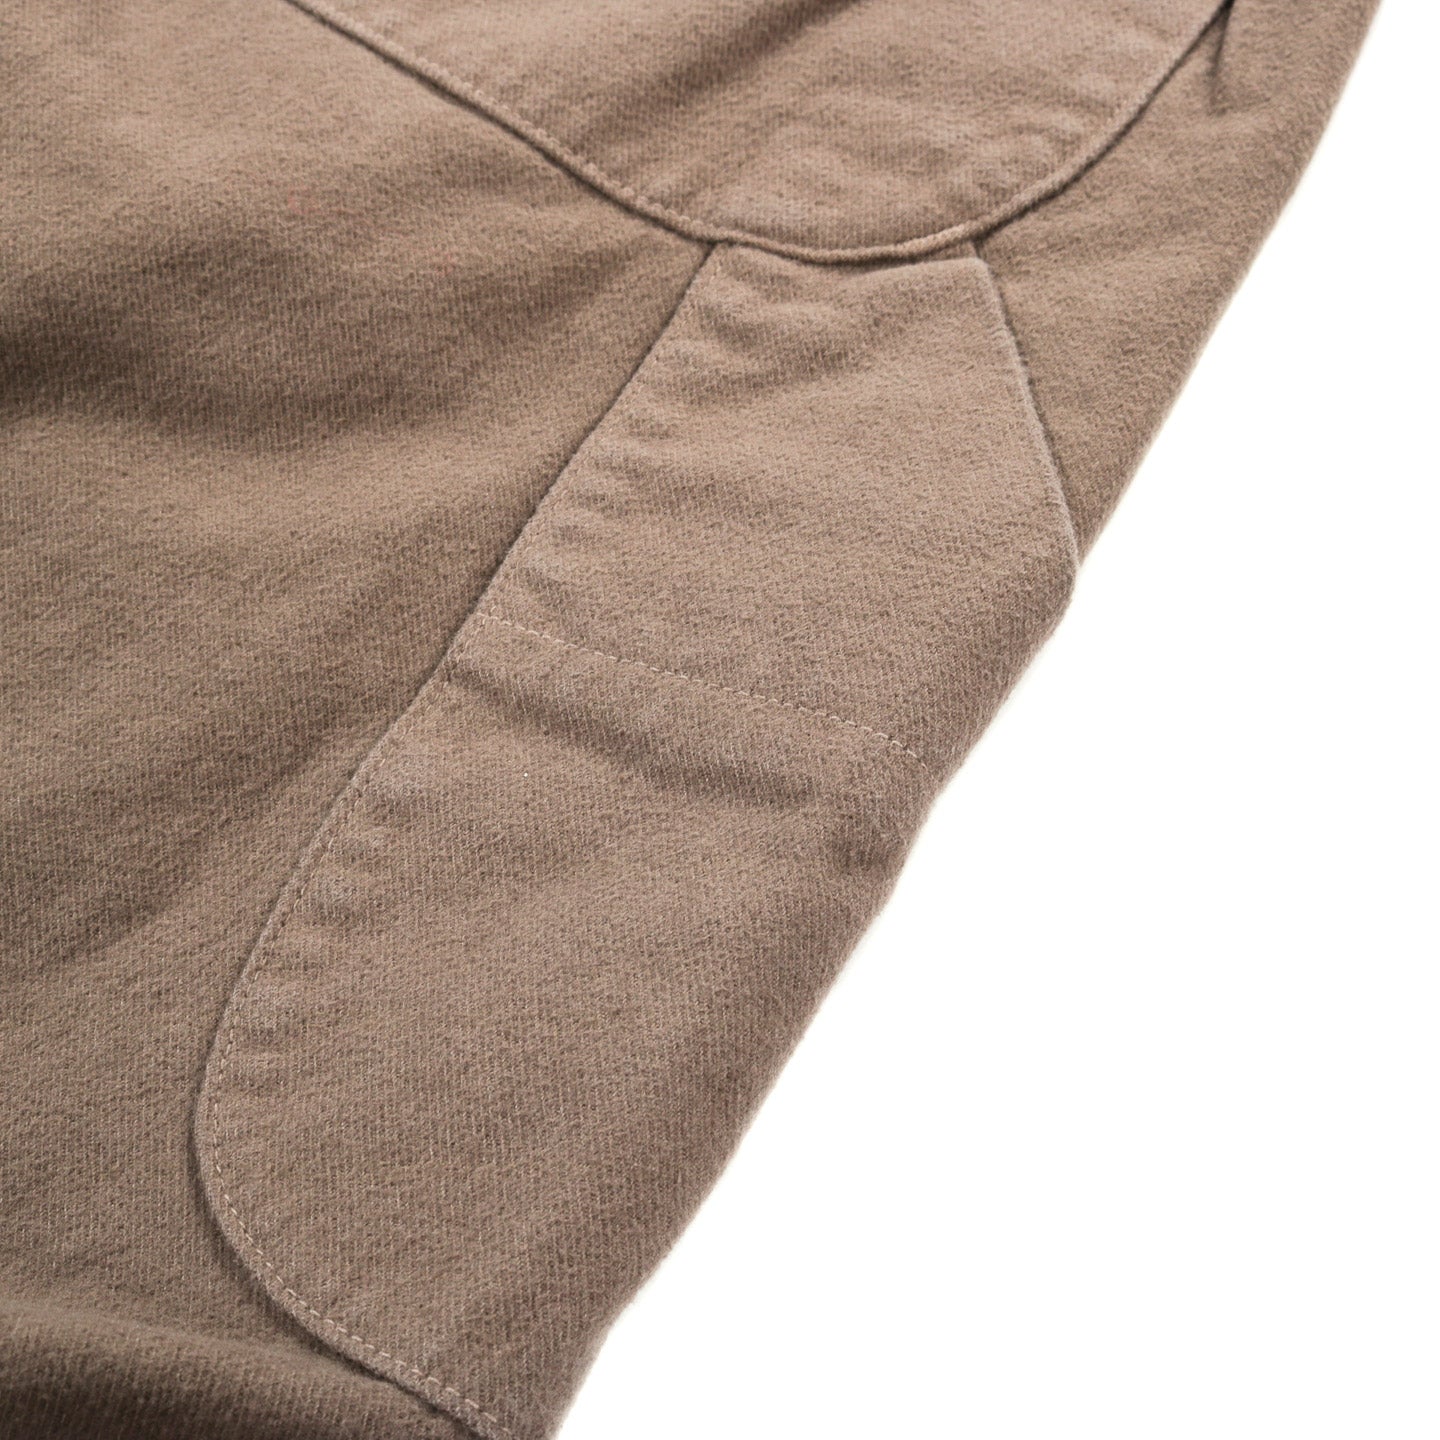 ORSLOW FRENCH WORK PANTS ROSE GREY